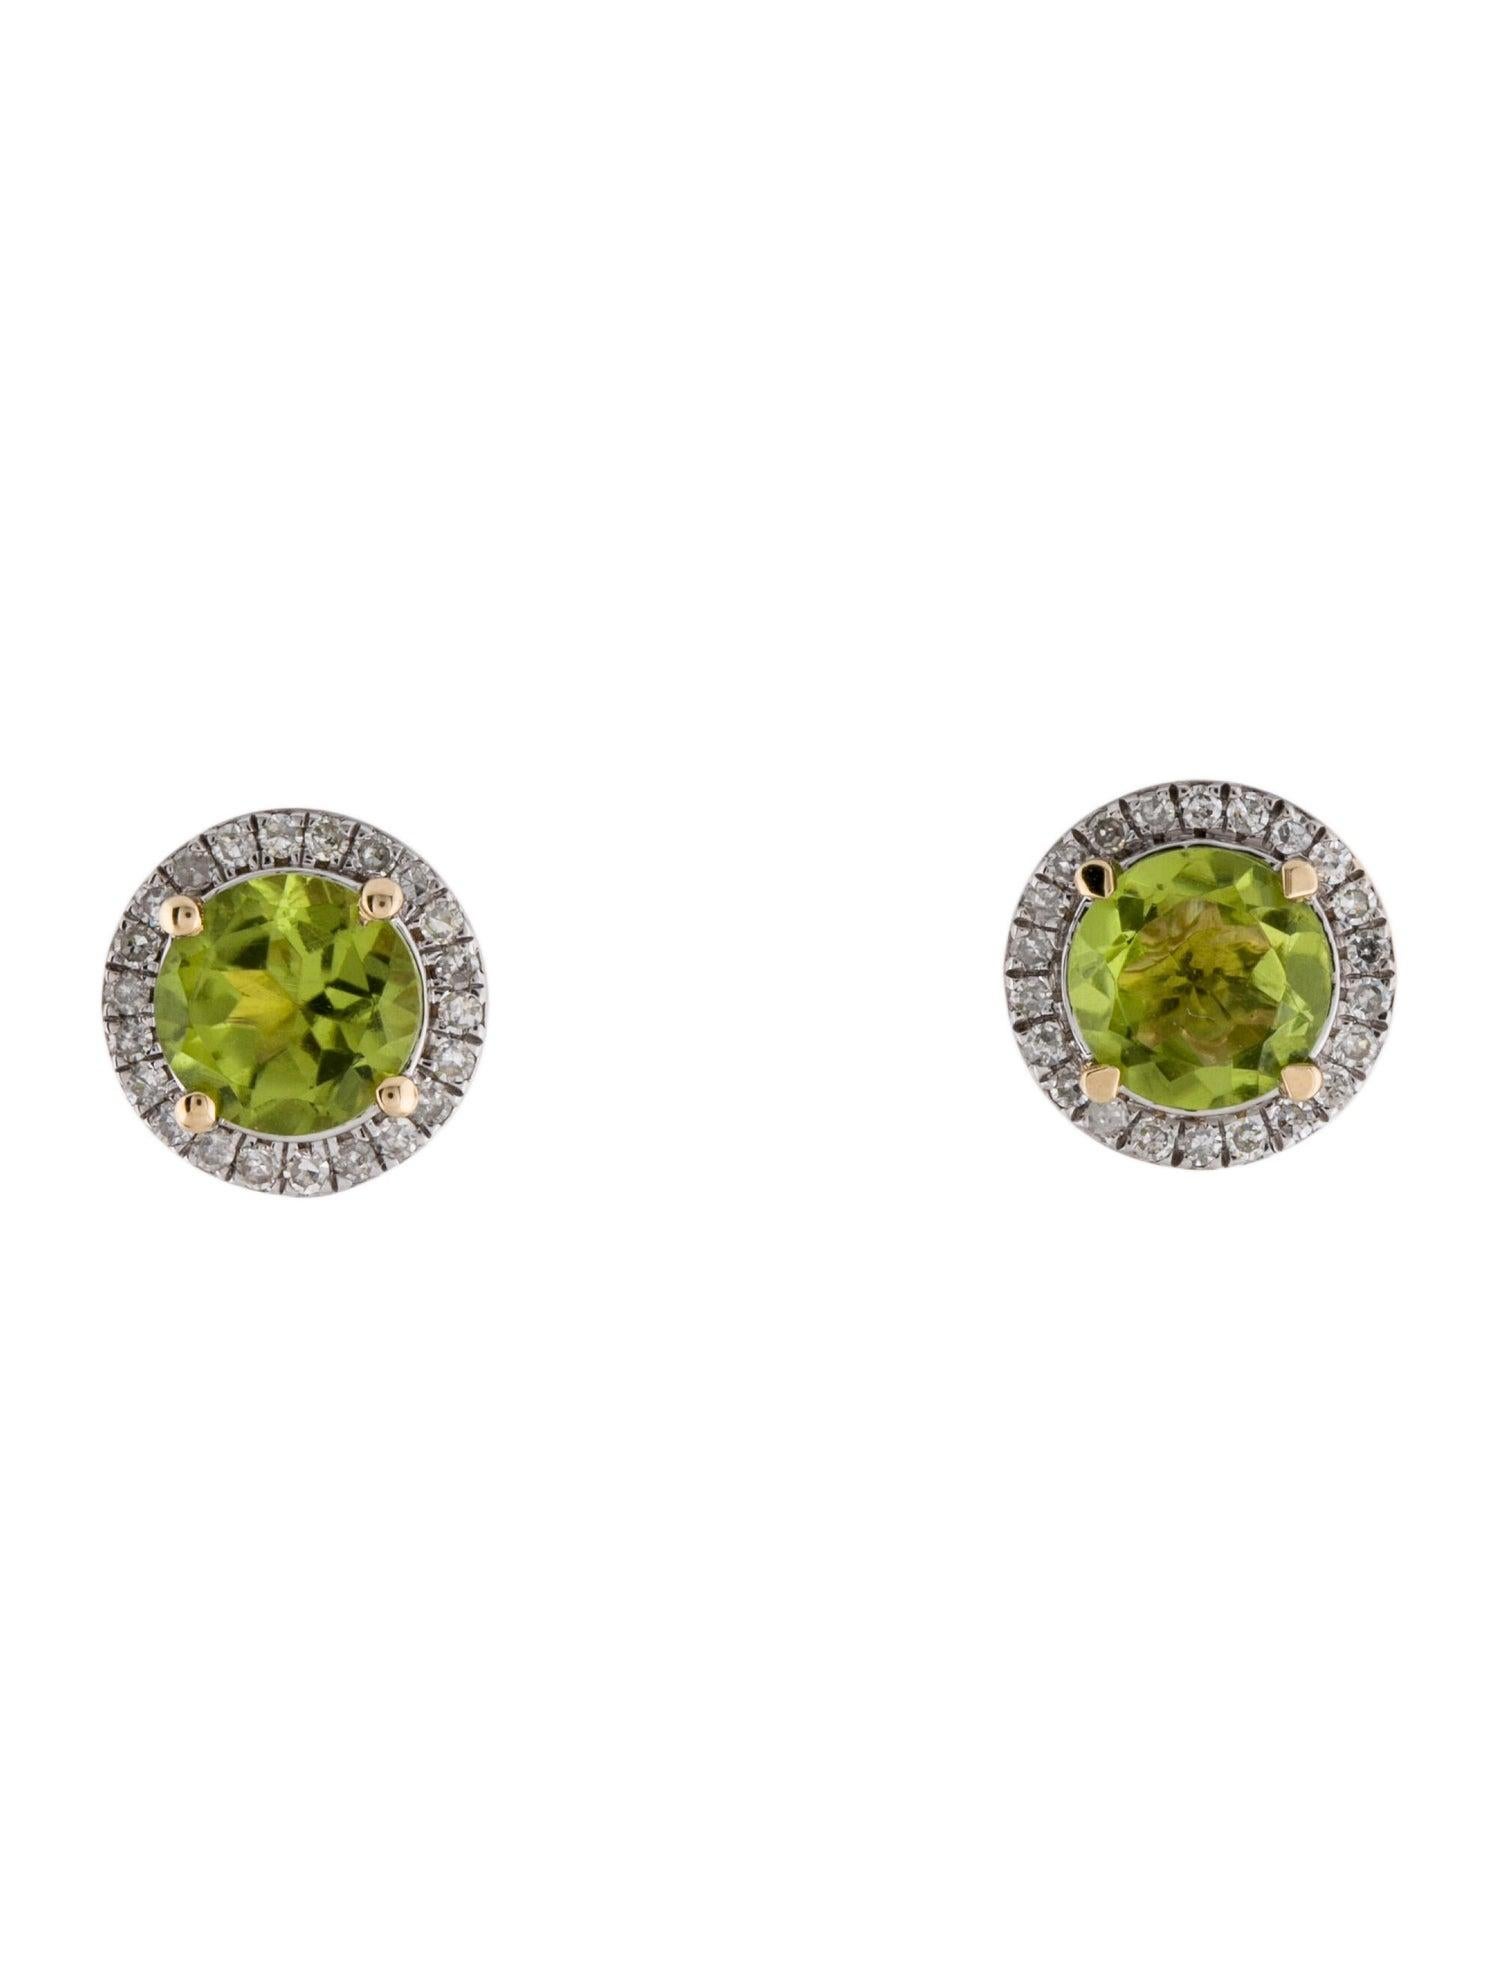 Elegant 14K 2.40ctw Peridot & Diamond Studs - Gemstone Jewelry Collection In New Condition For Sale In Holtsville, NY